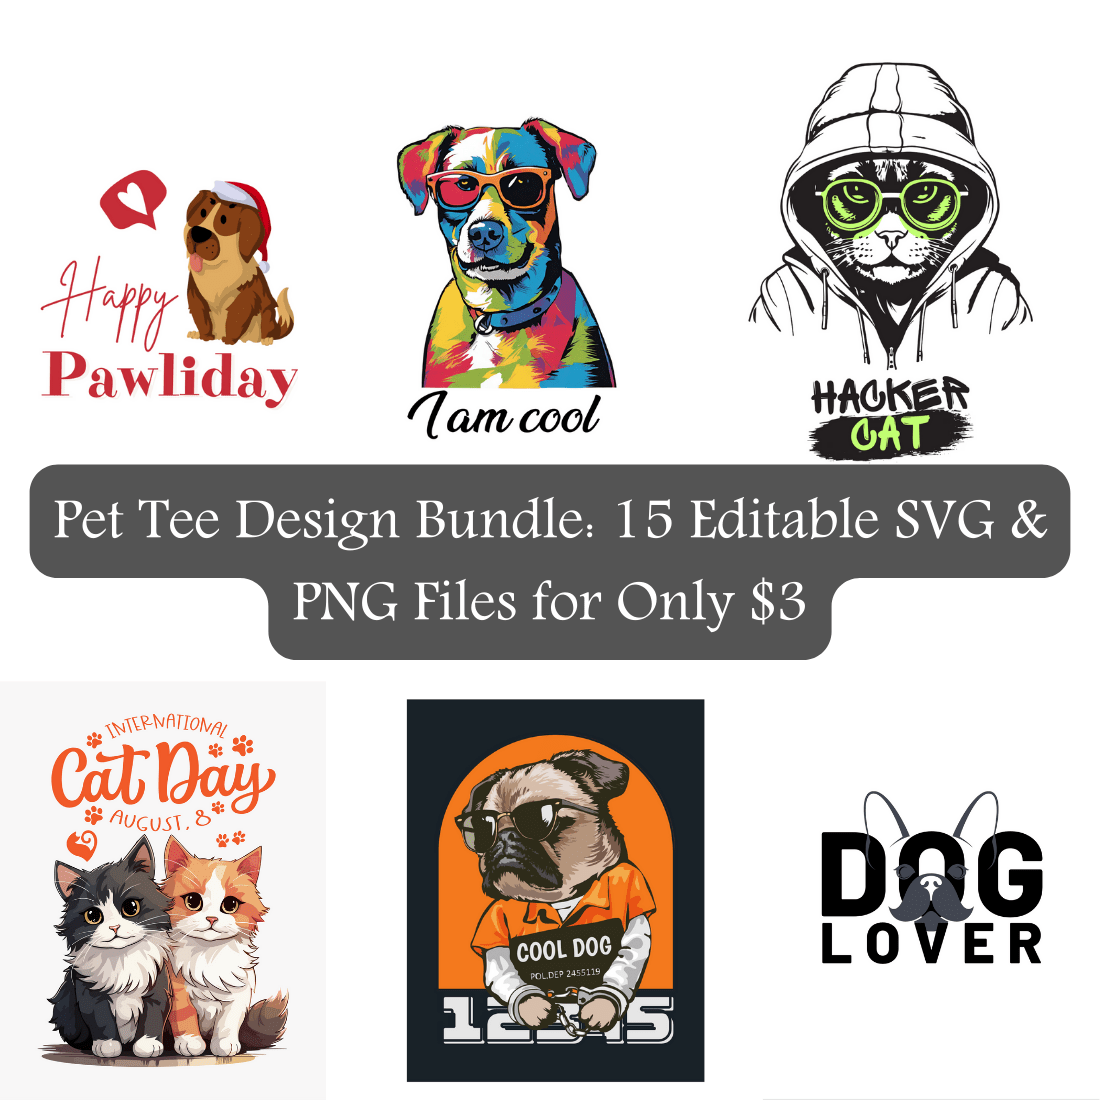 Pet Tee Design Bundle: 15 Editable SVG & PNG Files for Only $3 preview image.